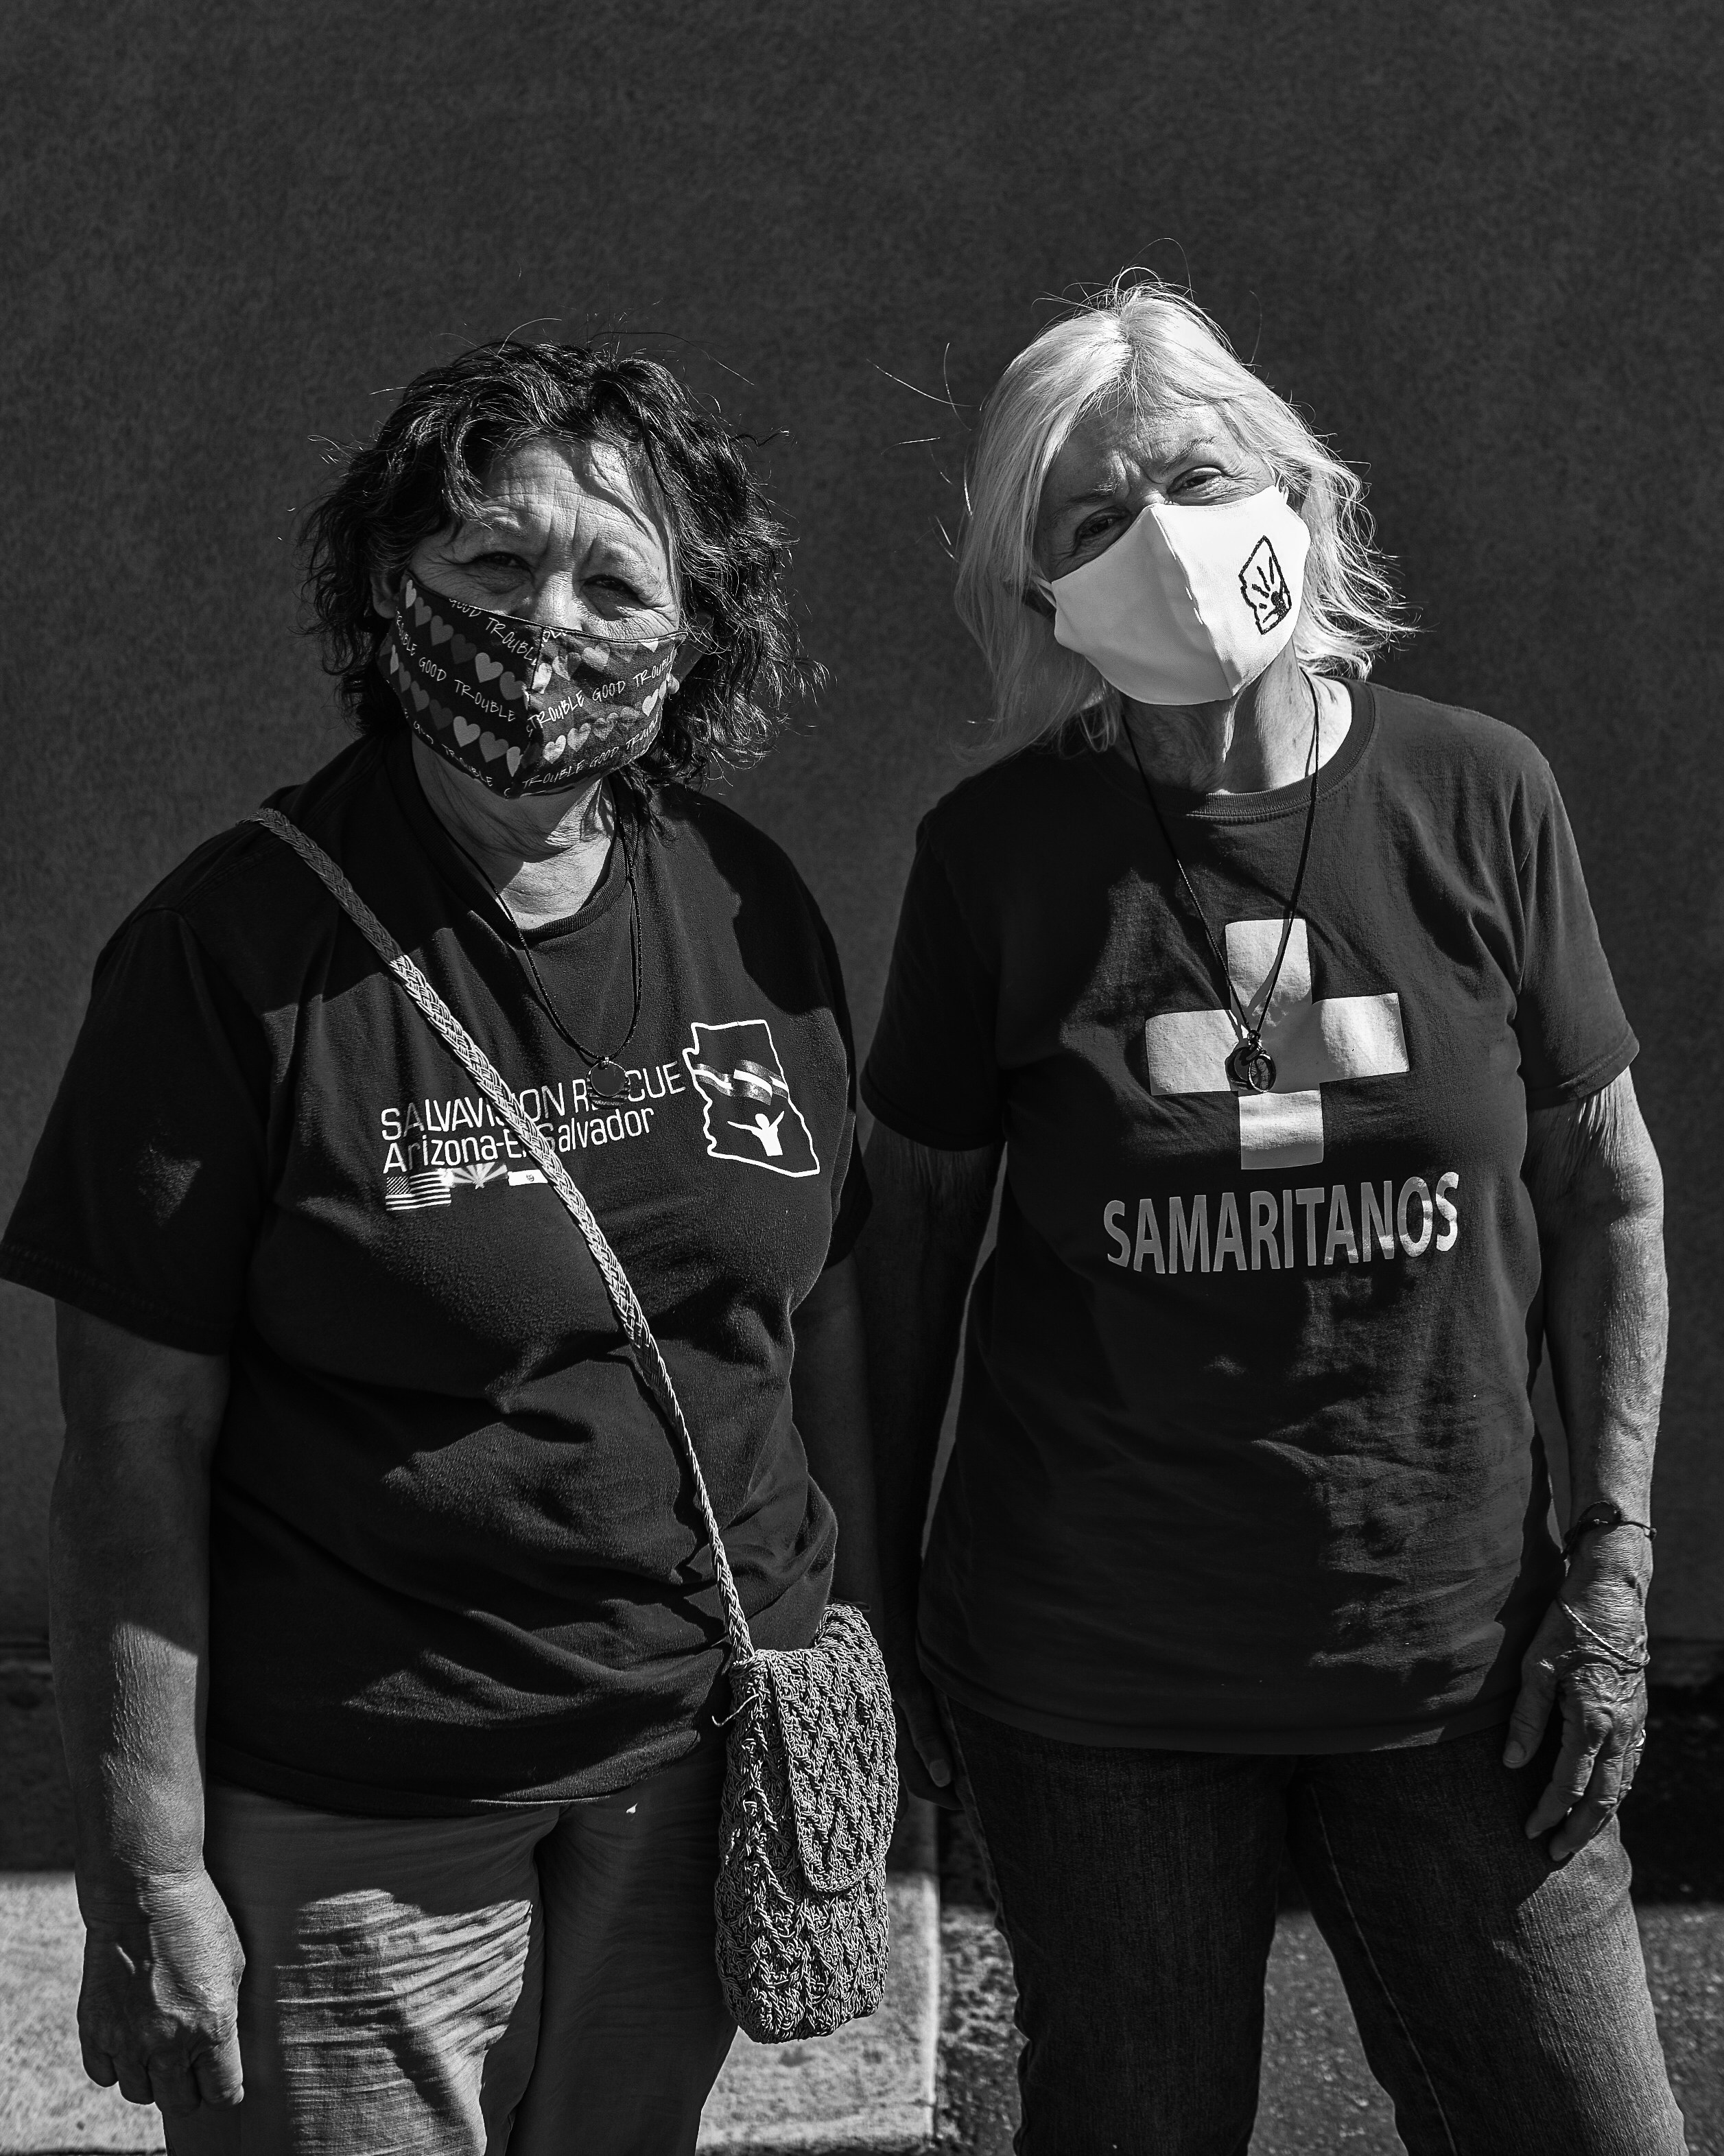 Migrant advocate Dora Rodriquez and Tucson Samaritan Gail Kocourek are collaborating to create a migrant resource center in the 1500-person town of Sasabe, Son. on Friday, April 2, 2021. The mayor of Sasabe believes roughly 10% of the 10,000 people expelled or deported into her town have elected to stay: effectively doubling the population in less than a year.